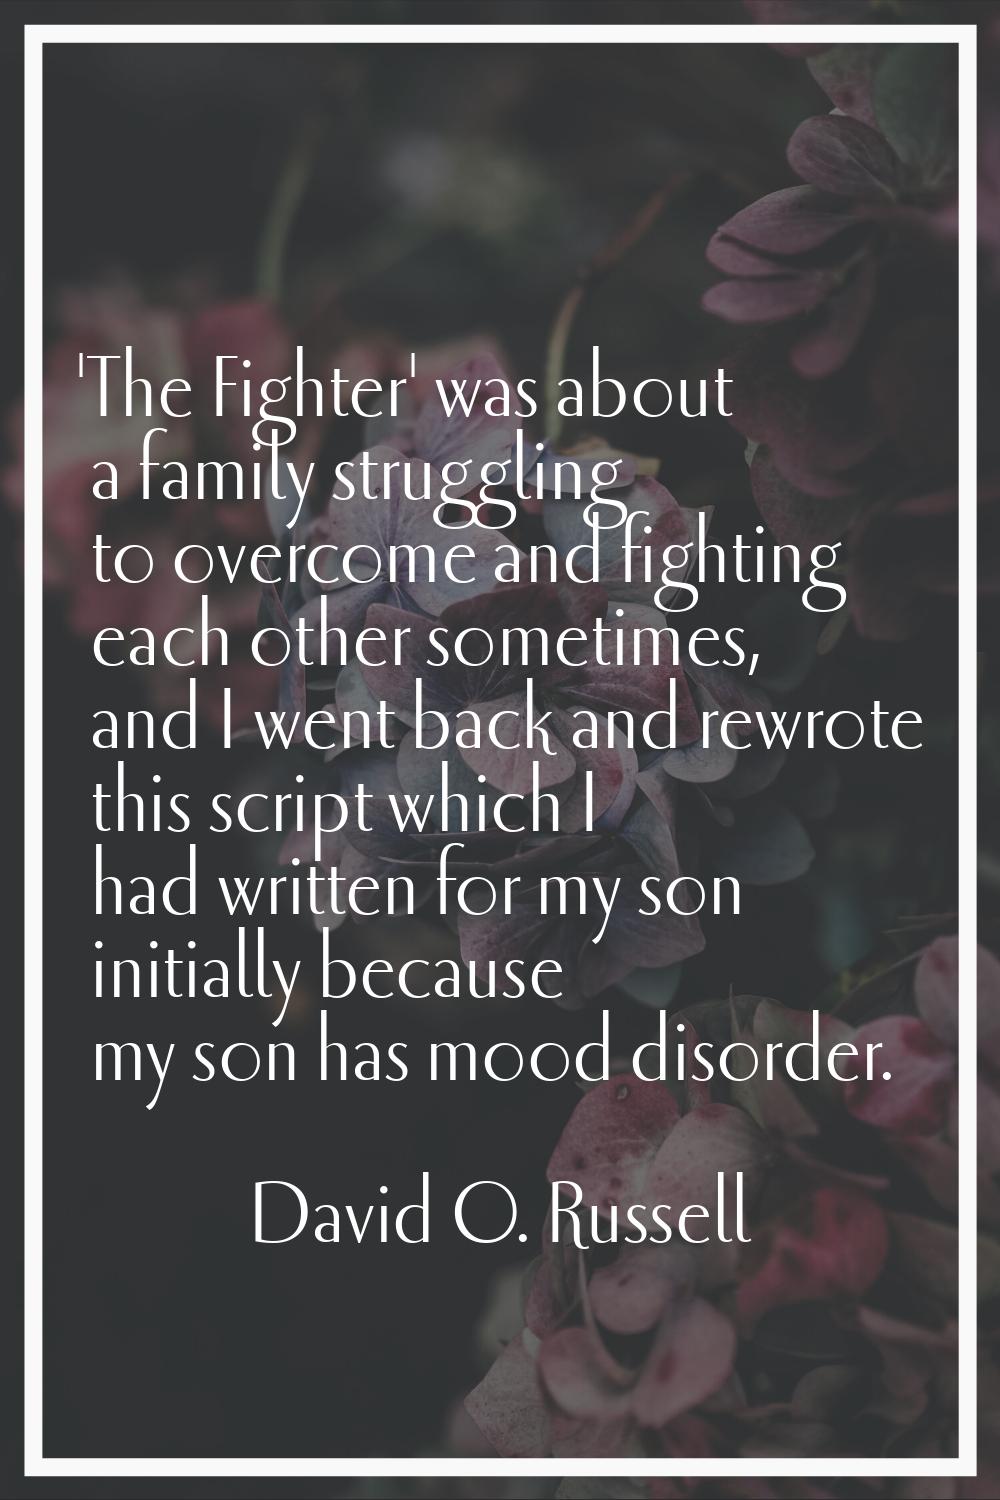 'The Fighter' was about a family struggling to overcome and fighting each other sometimes, and I we